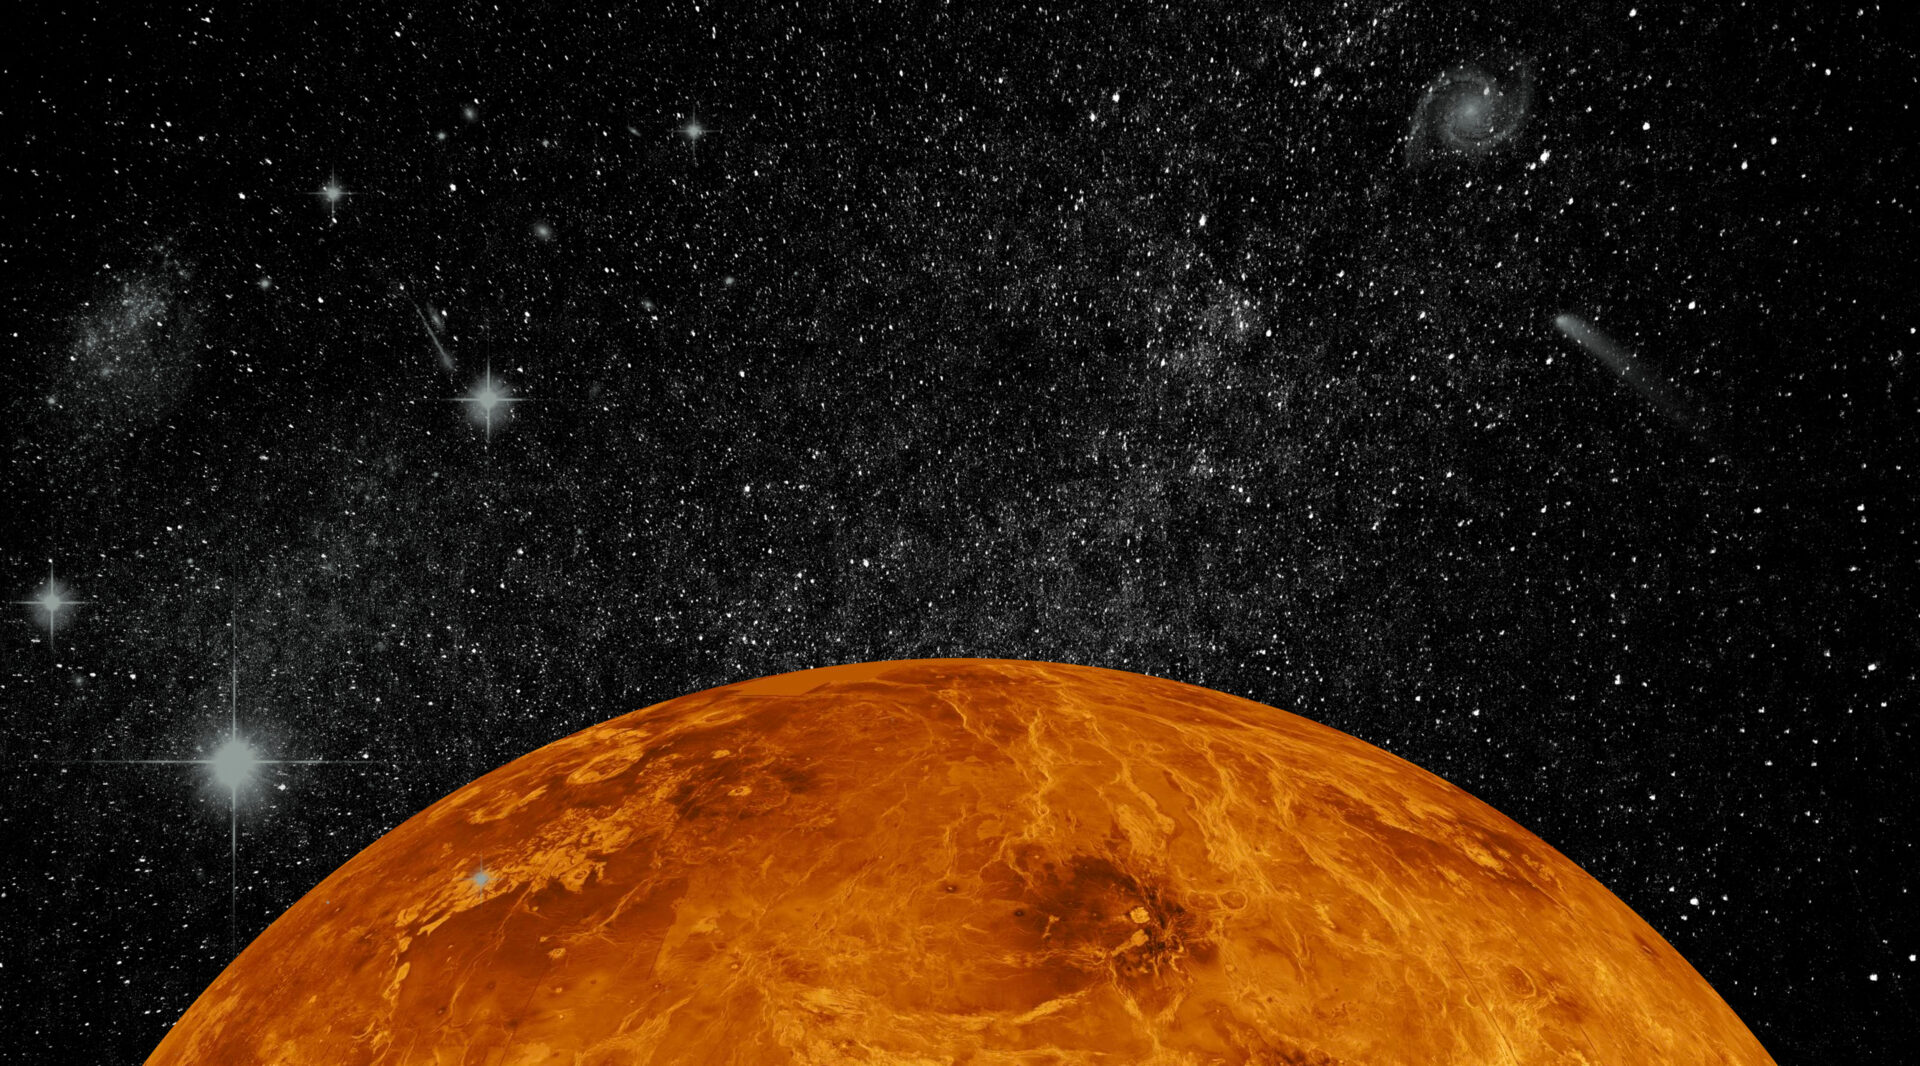 Futuristic view of venus planet rising with cosmos background of